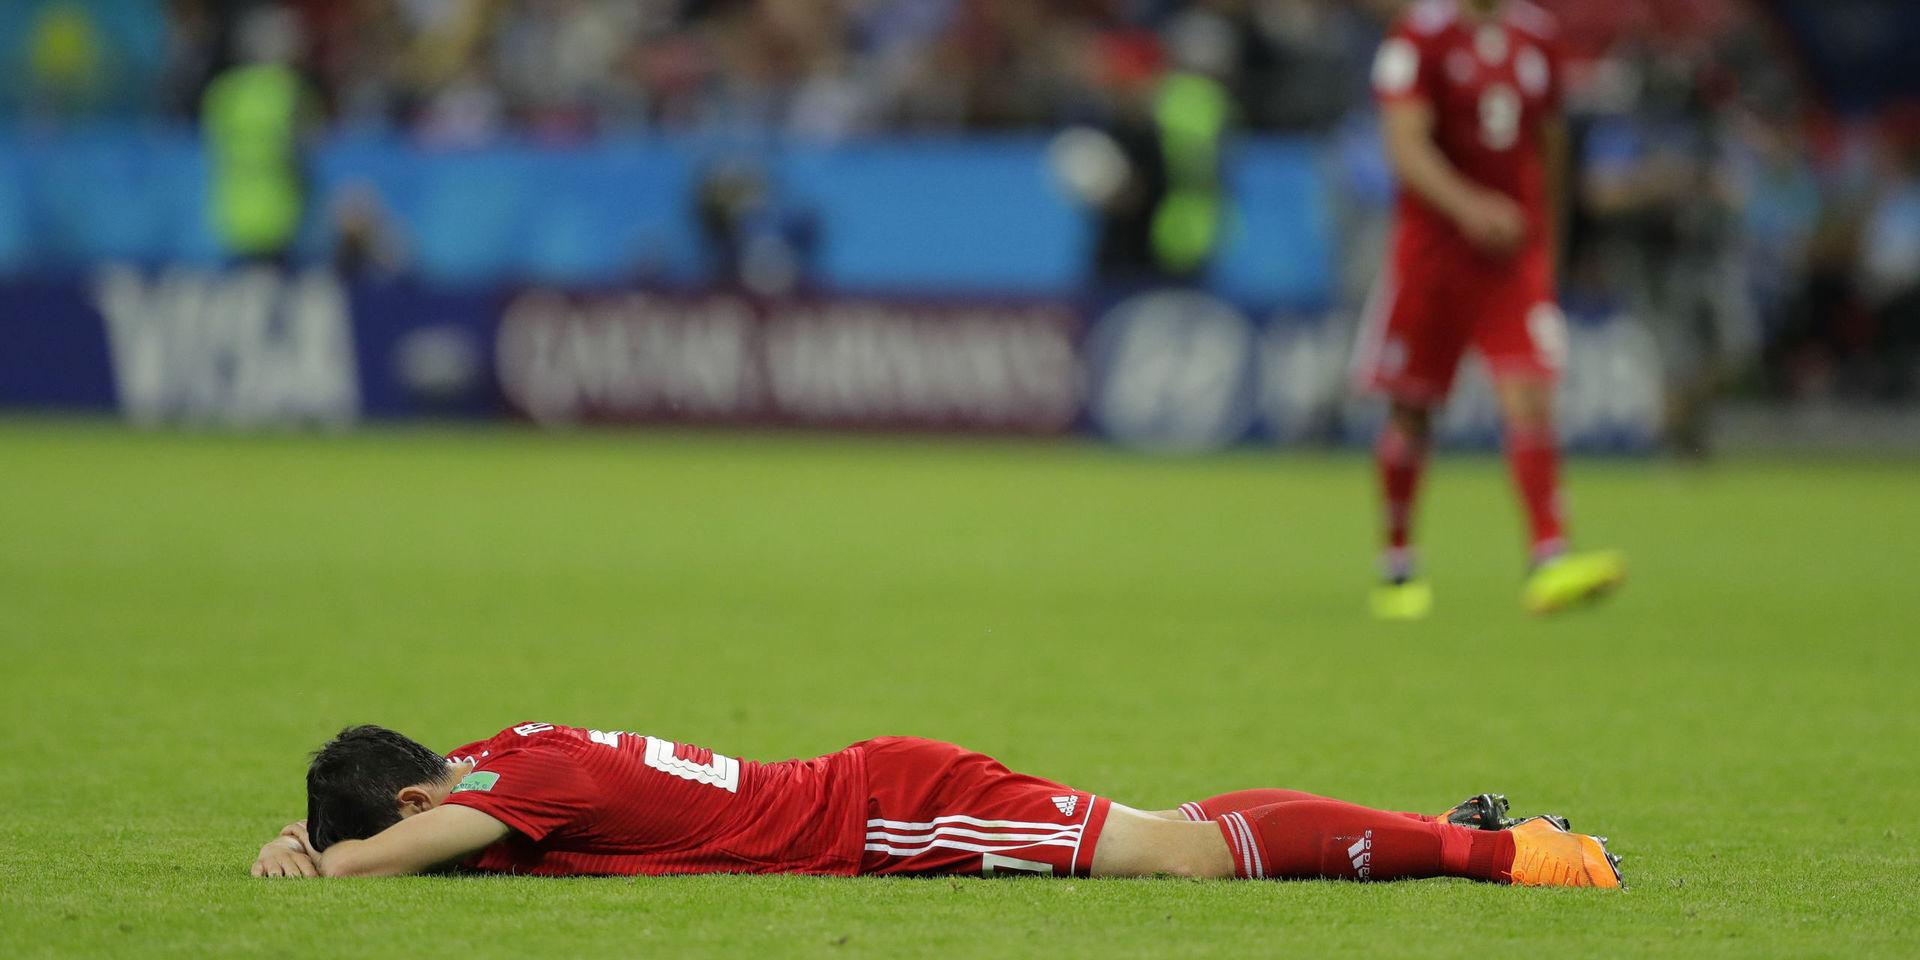 Iran&apos;s Sardar Azmoun lies flat out in the ground after the end of the group B match between Iran and Spain at the 2018 soccer World Cup in the Kazan Arena in Kazan, Russia, Wednesday, June 20, 2018. Spain won the game 1-0. (AP Photo/Sergei Grits)